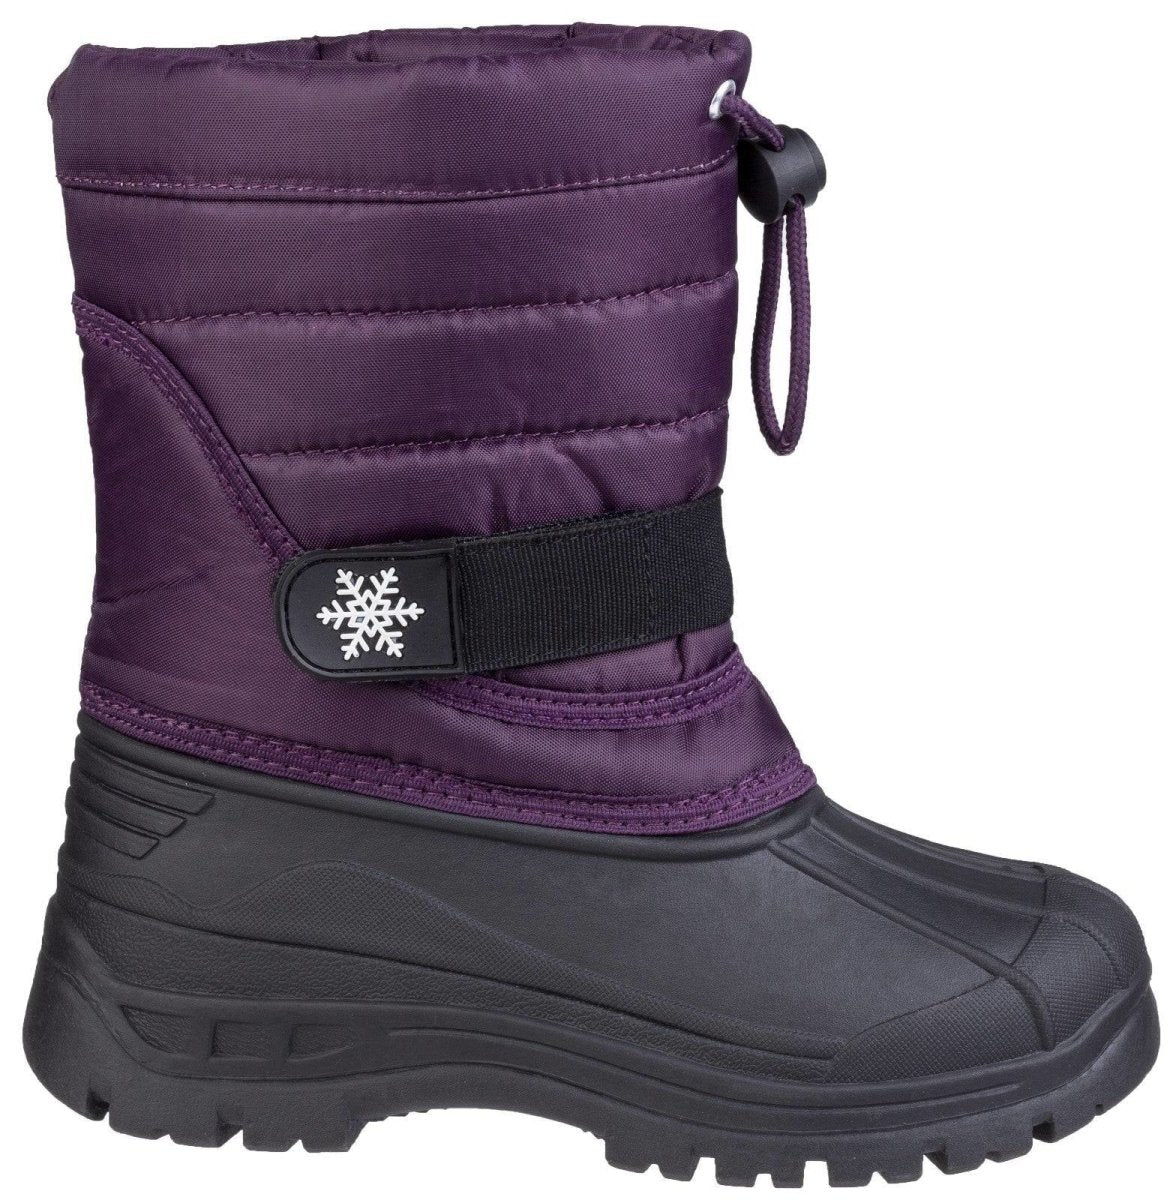 Cotswold Icicle Toggle Kids Snow Boot Wellingtons - Shoe Store Direct